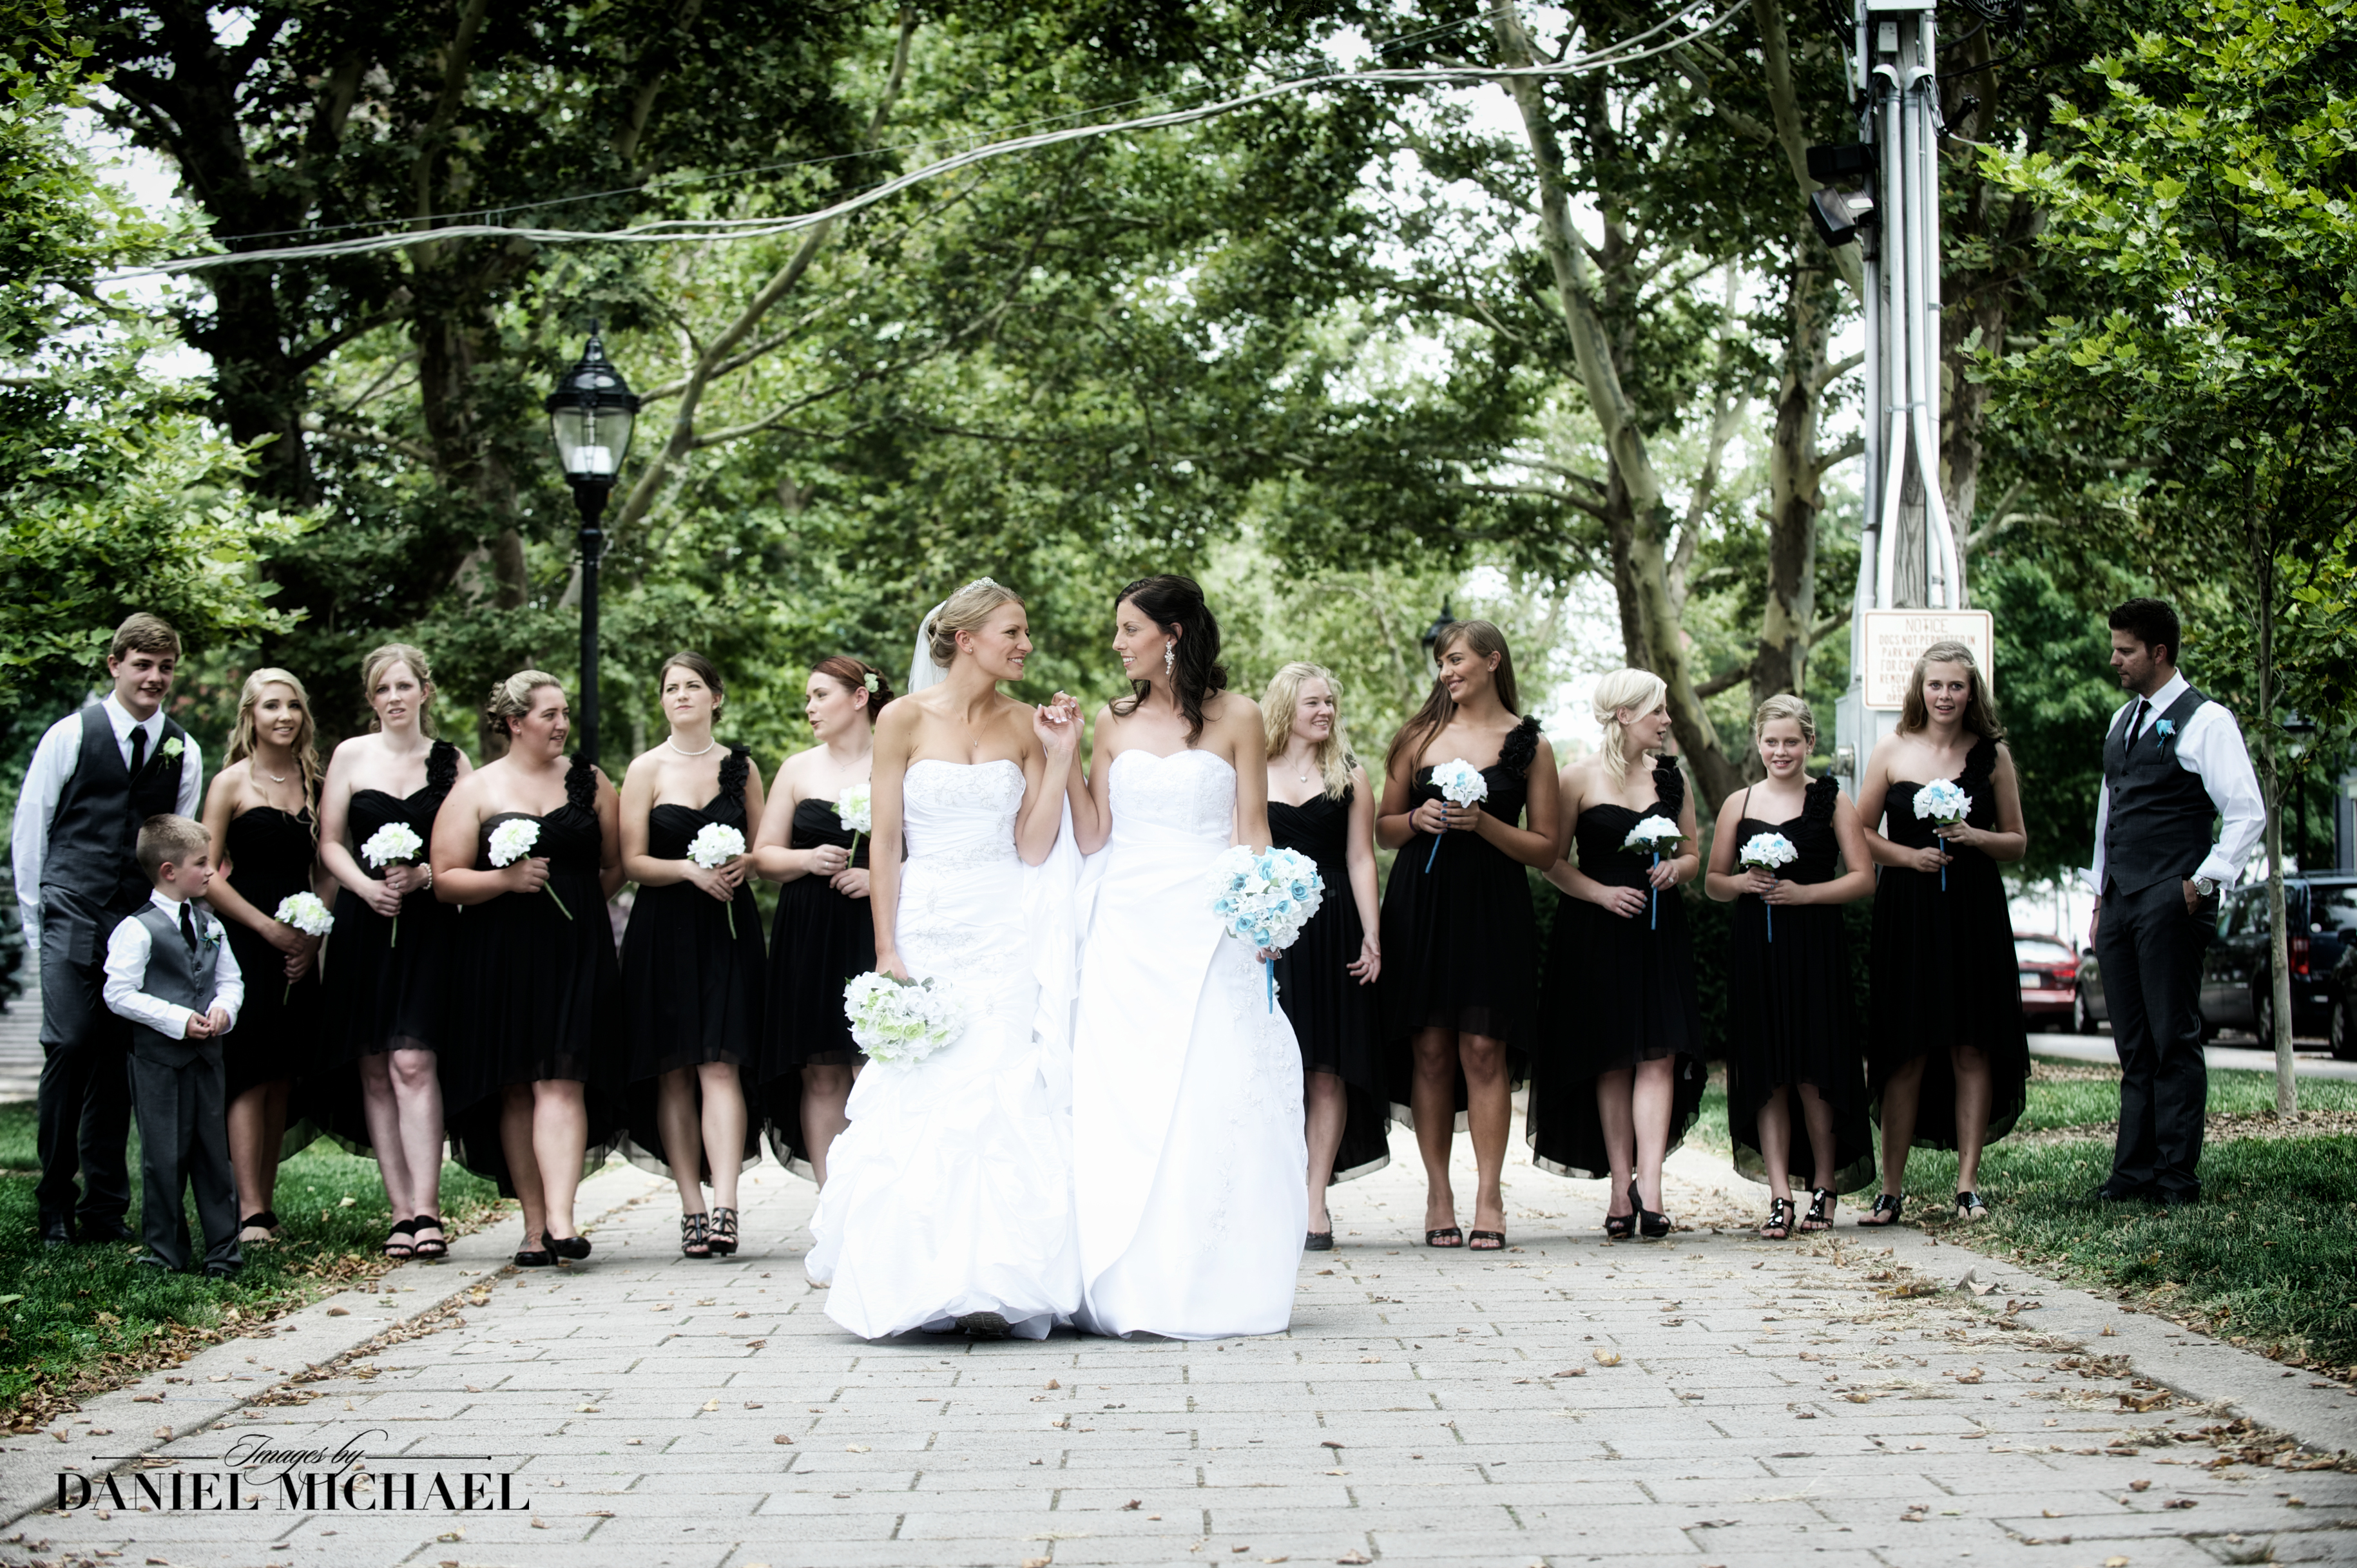 LGBTQ+ Wedding Party Photo with Two Brides